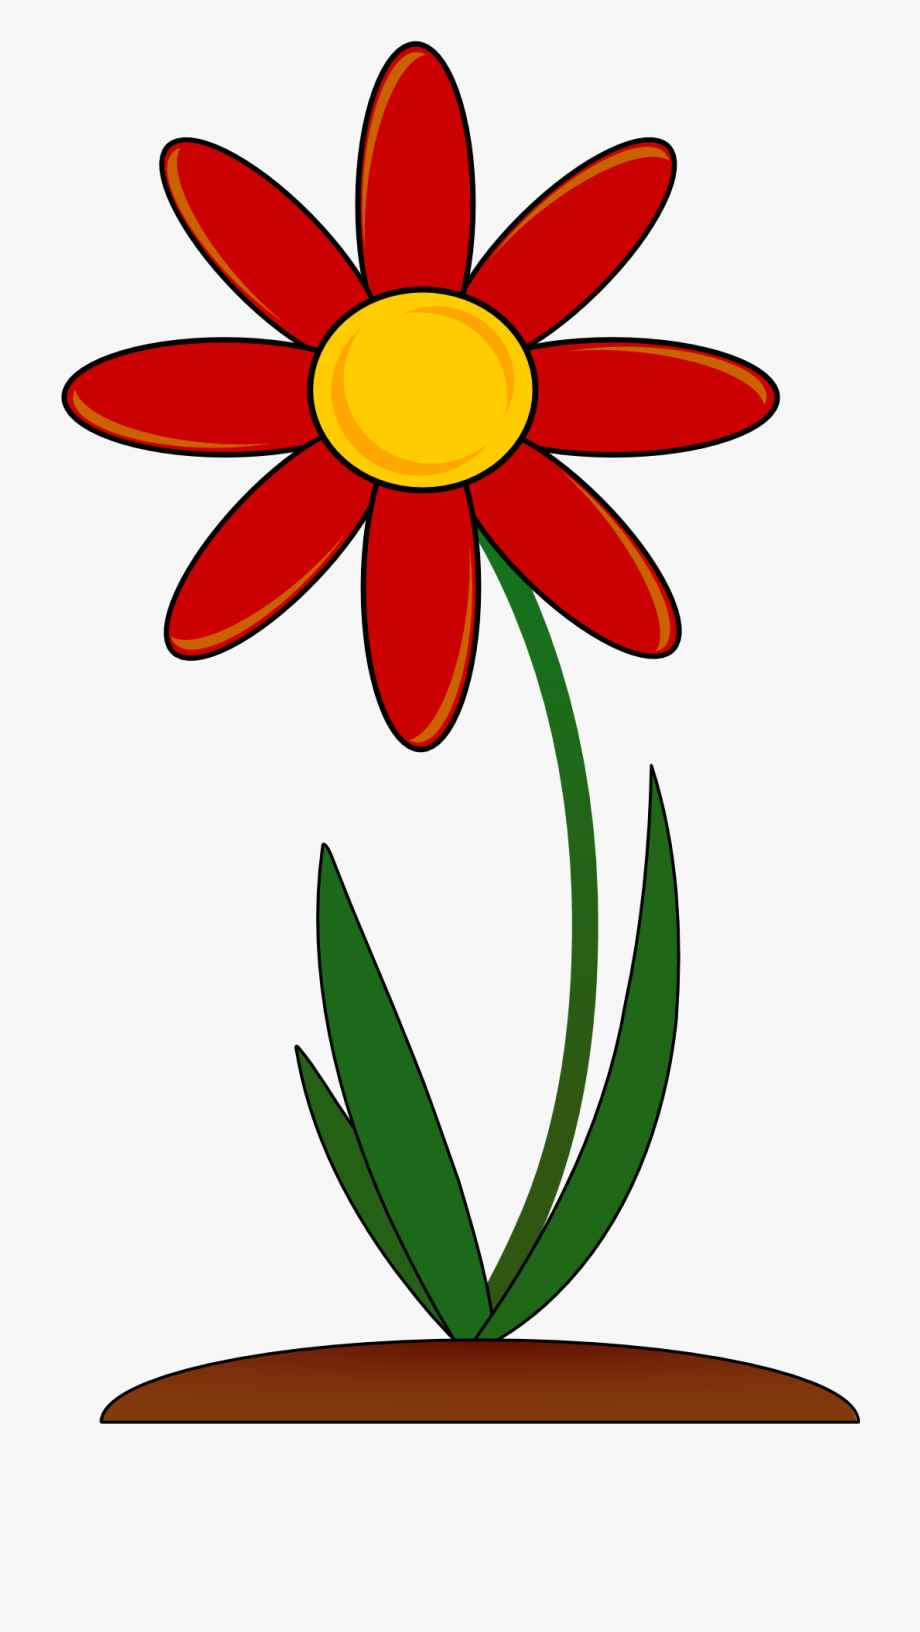 Flower Clipart Png , Transparent Cartoon, Free Cliparts